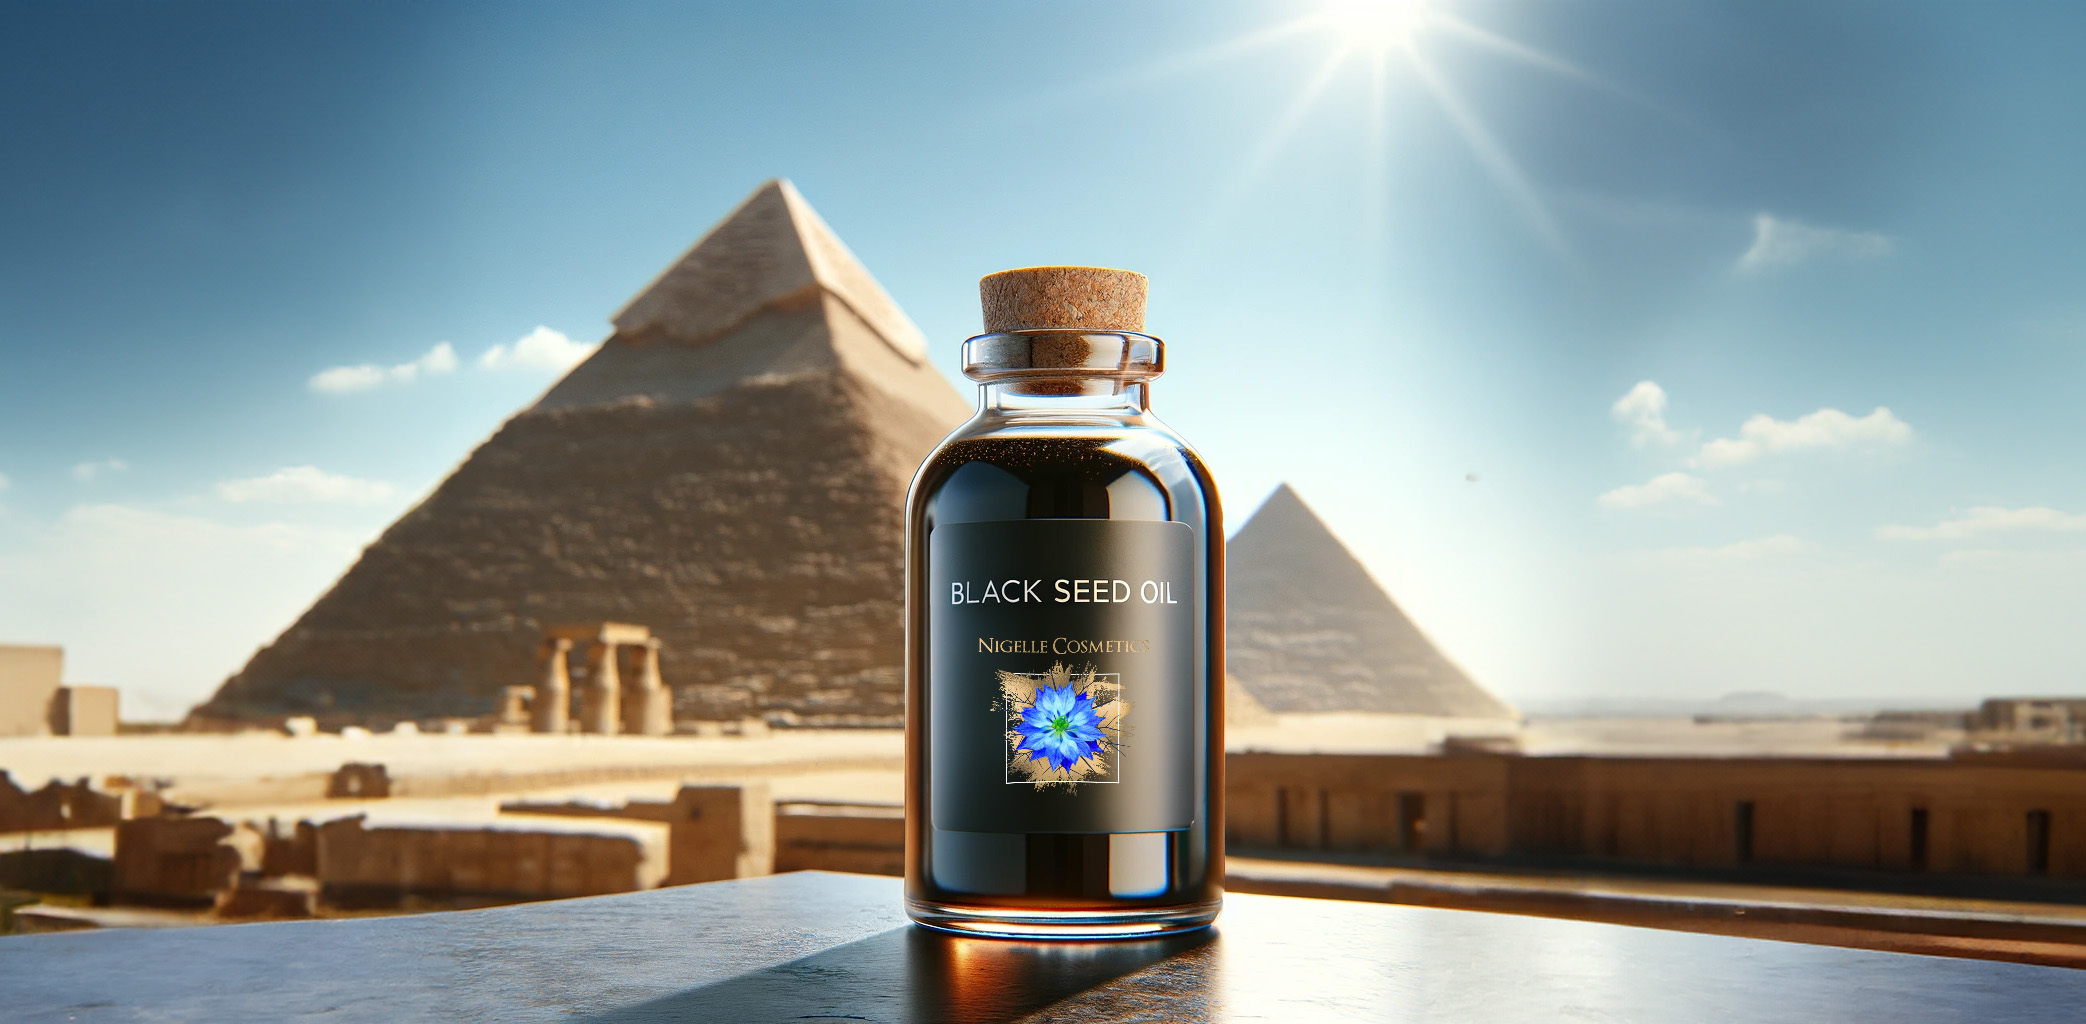 Bottle of Nigelle Cosmetics black cumin oil placed on a wooden surface with the pyramids of Egypt in the background under a sunny sky.